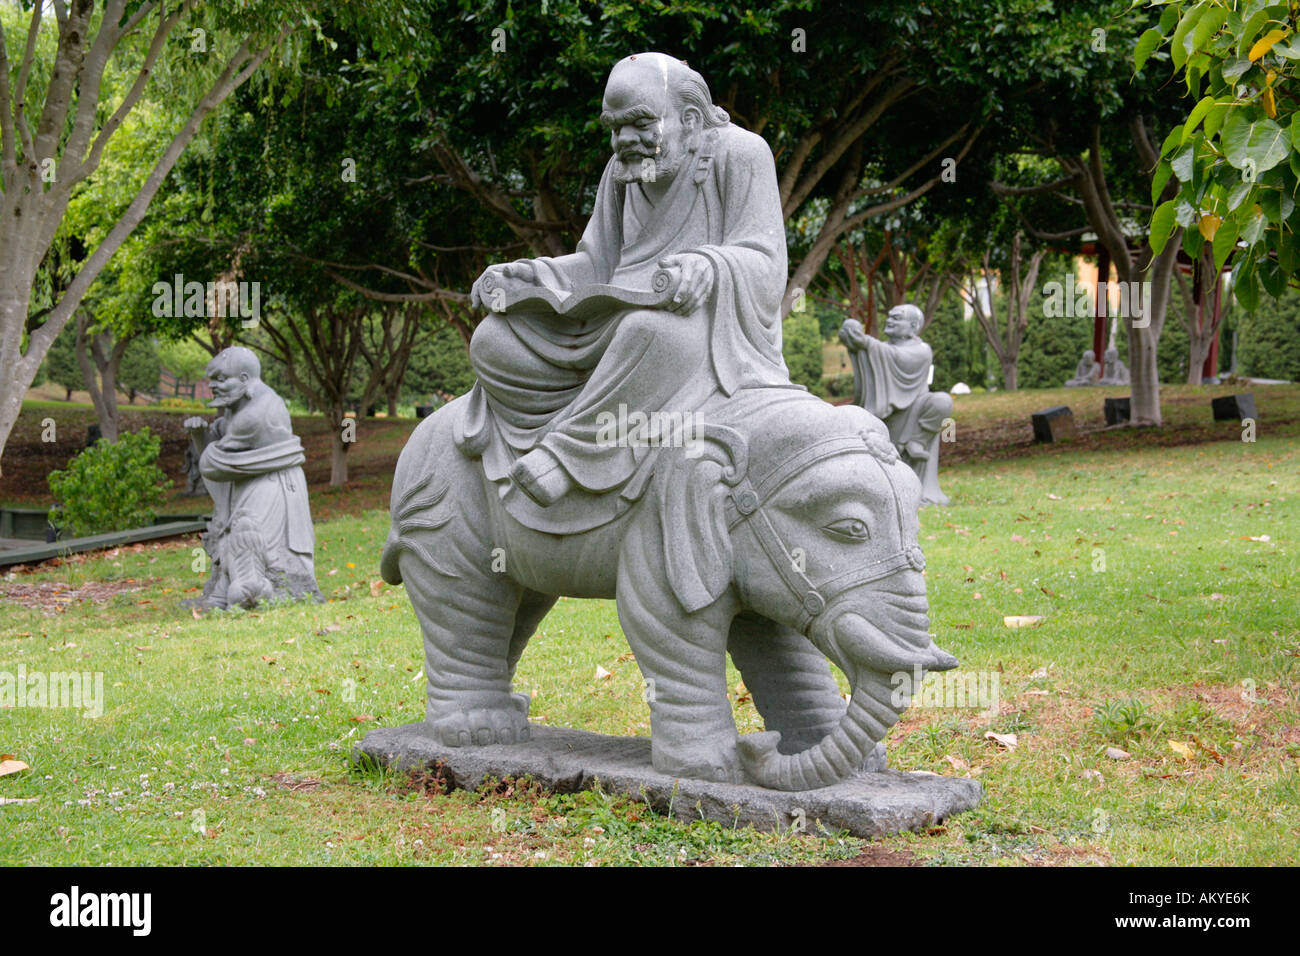 Statue of ancient  Chinese sage on elephant in grounds of  Nan Tien Buddhist Temple,Berkeley,New South Wales. Stock Photo